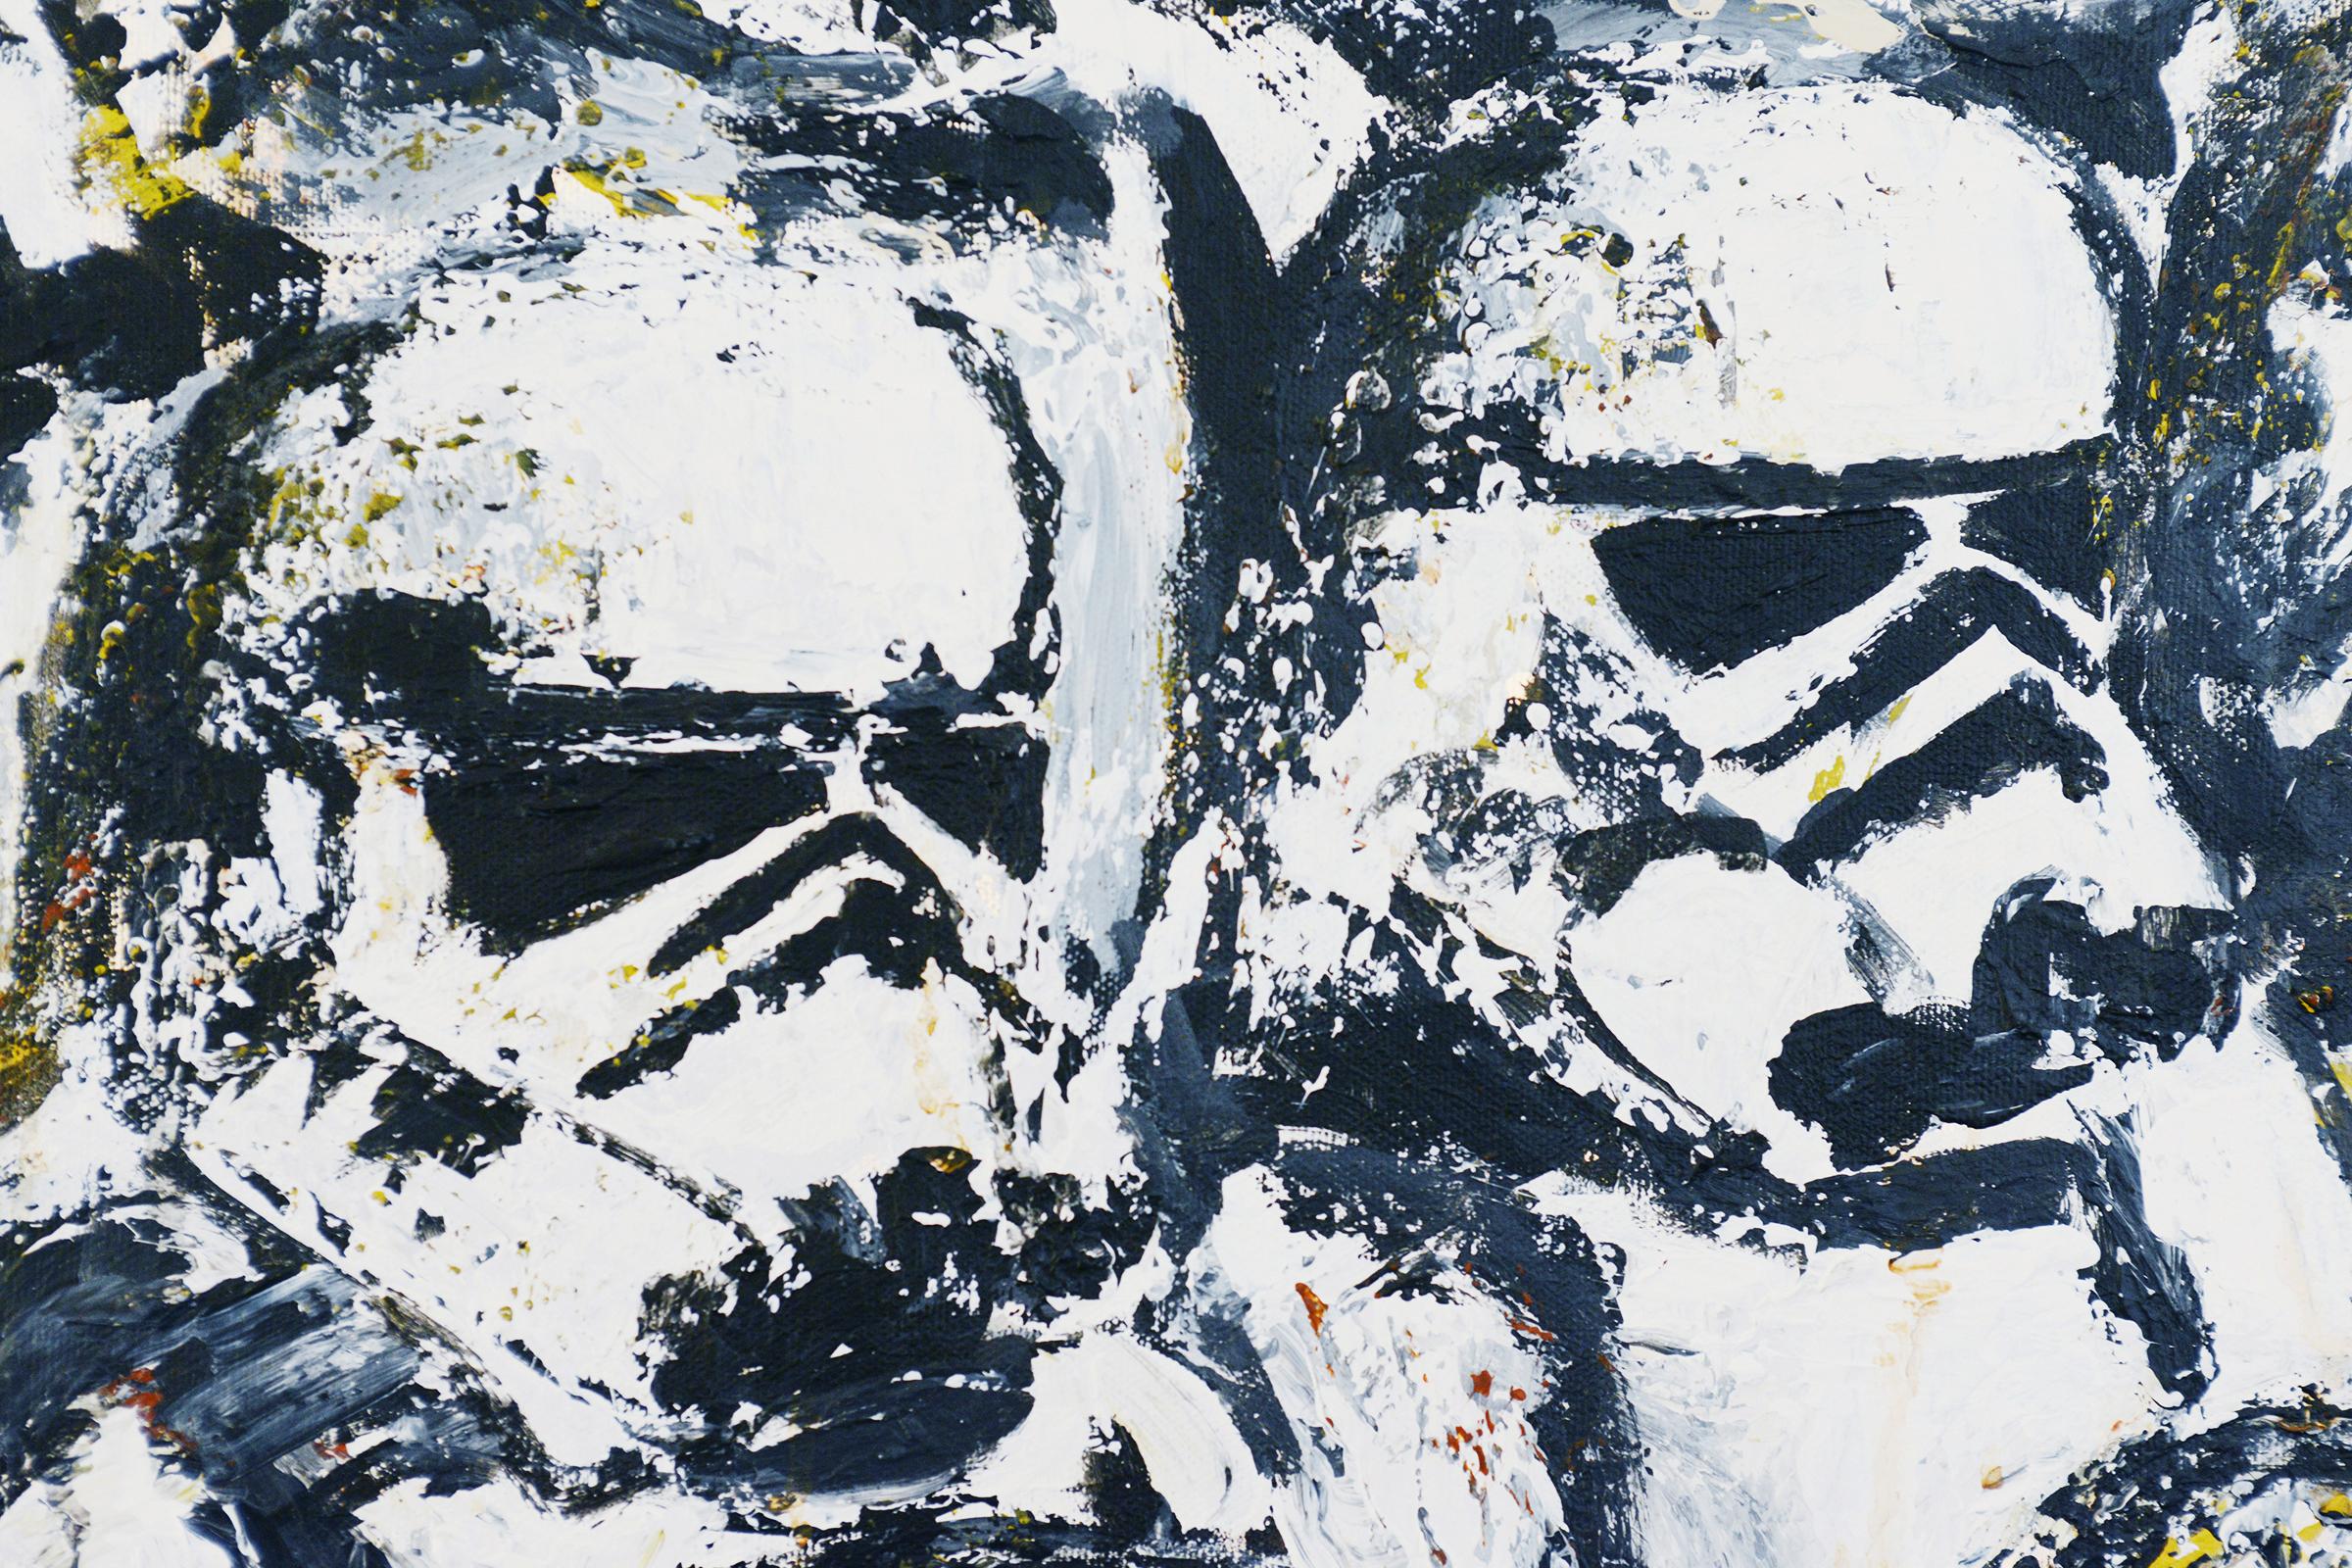 Hand-Crafted Stormtroopers Painting For Sale